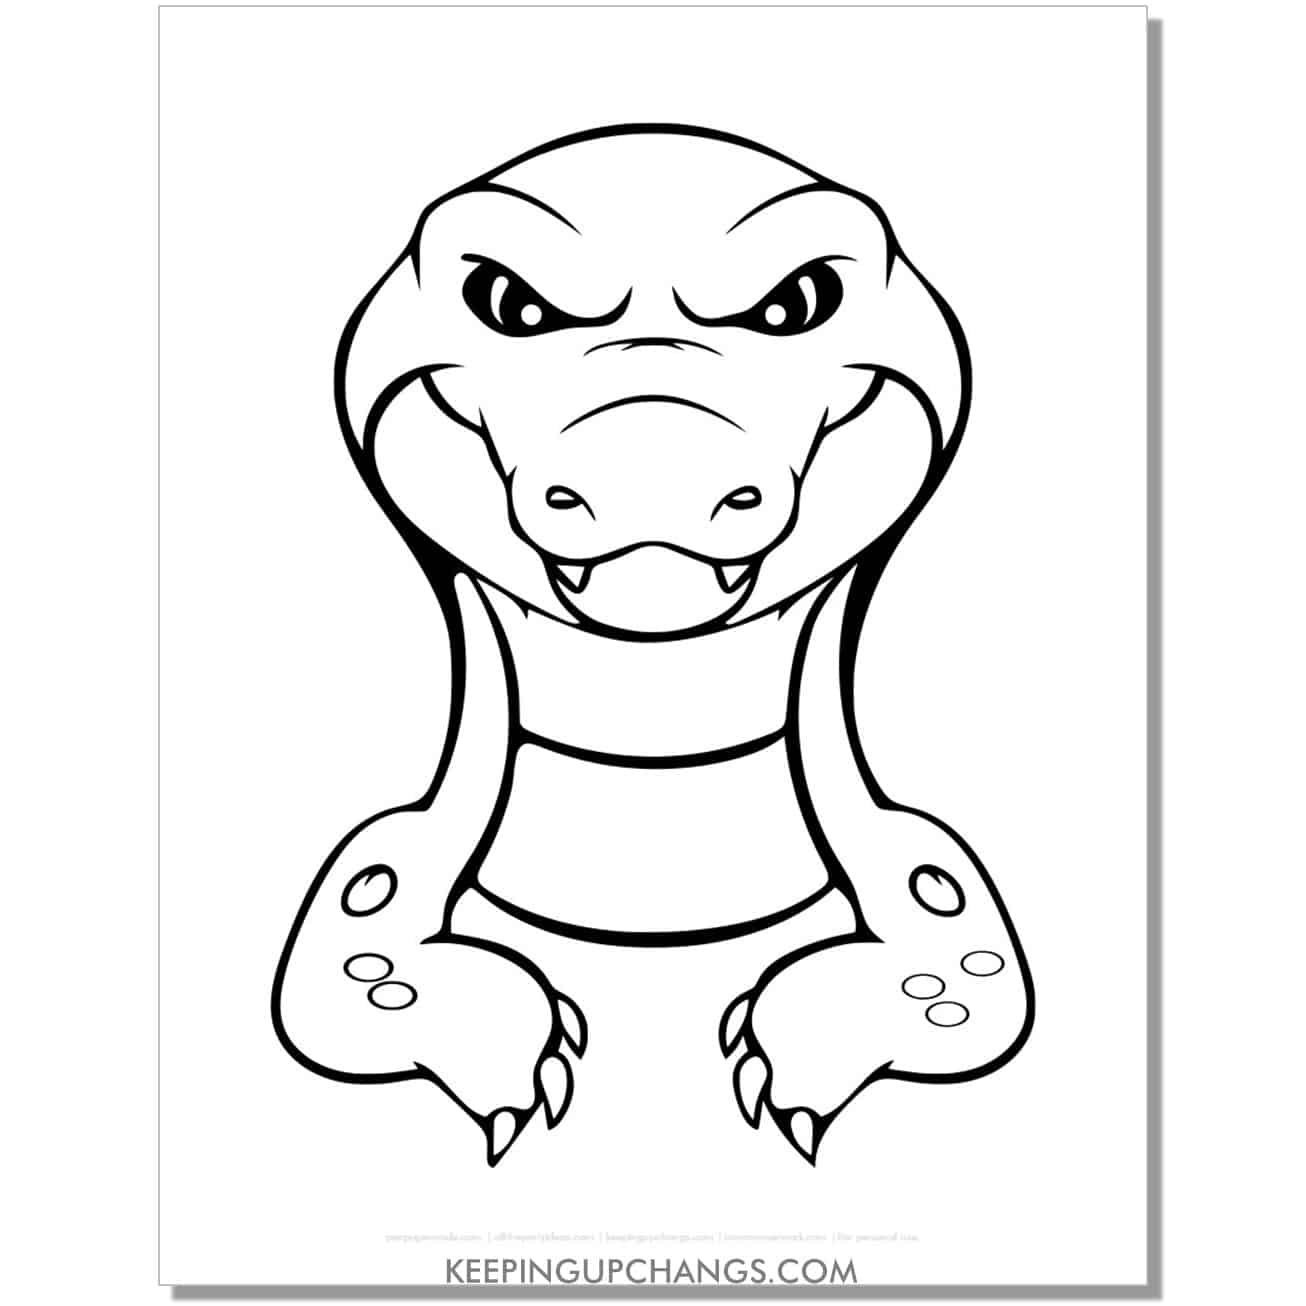 free scary alligator, crocodile head and arms coloring page, sheet.